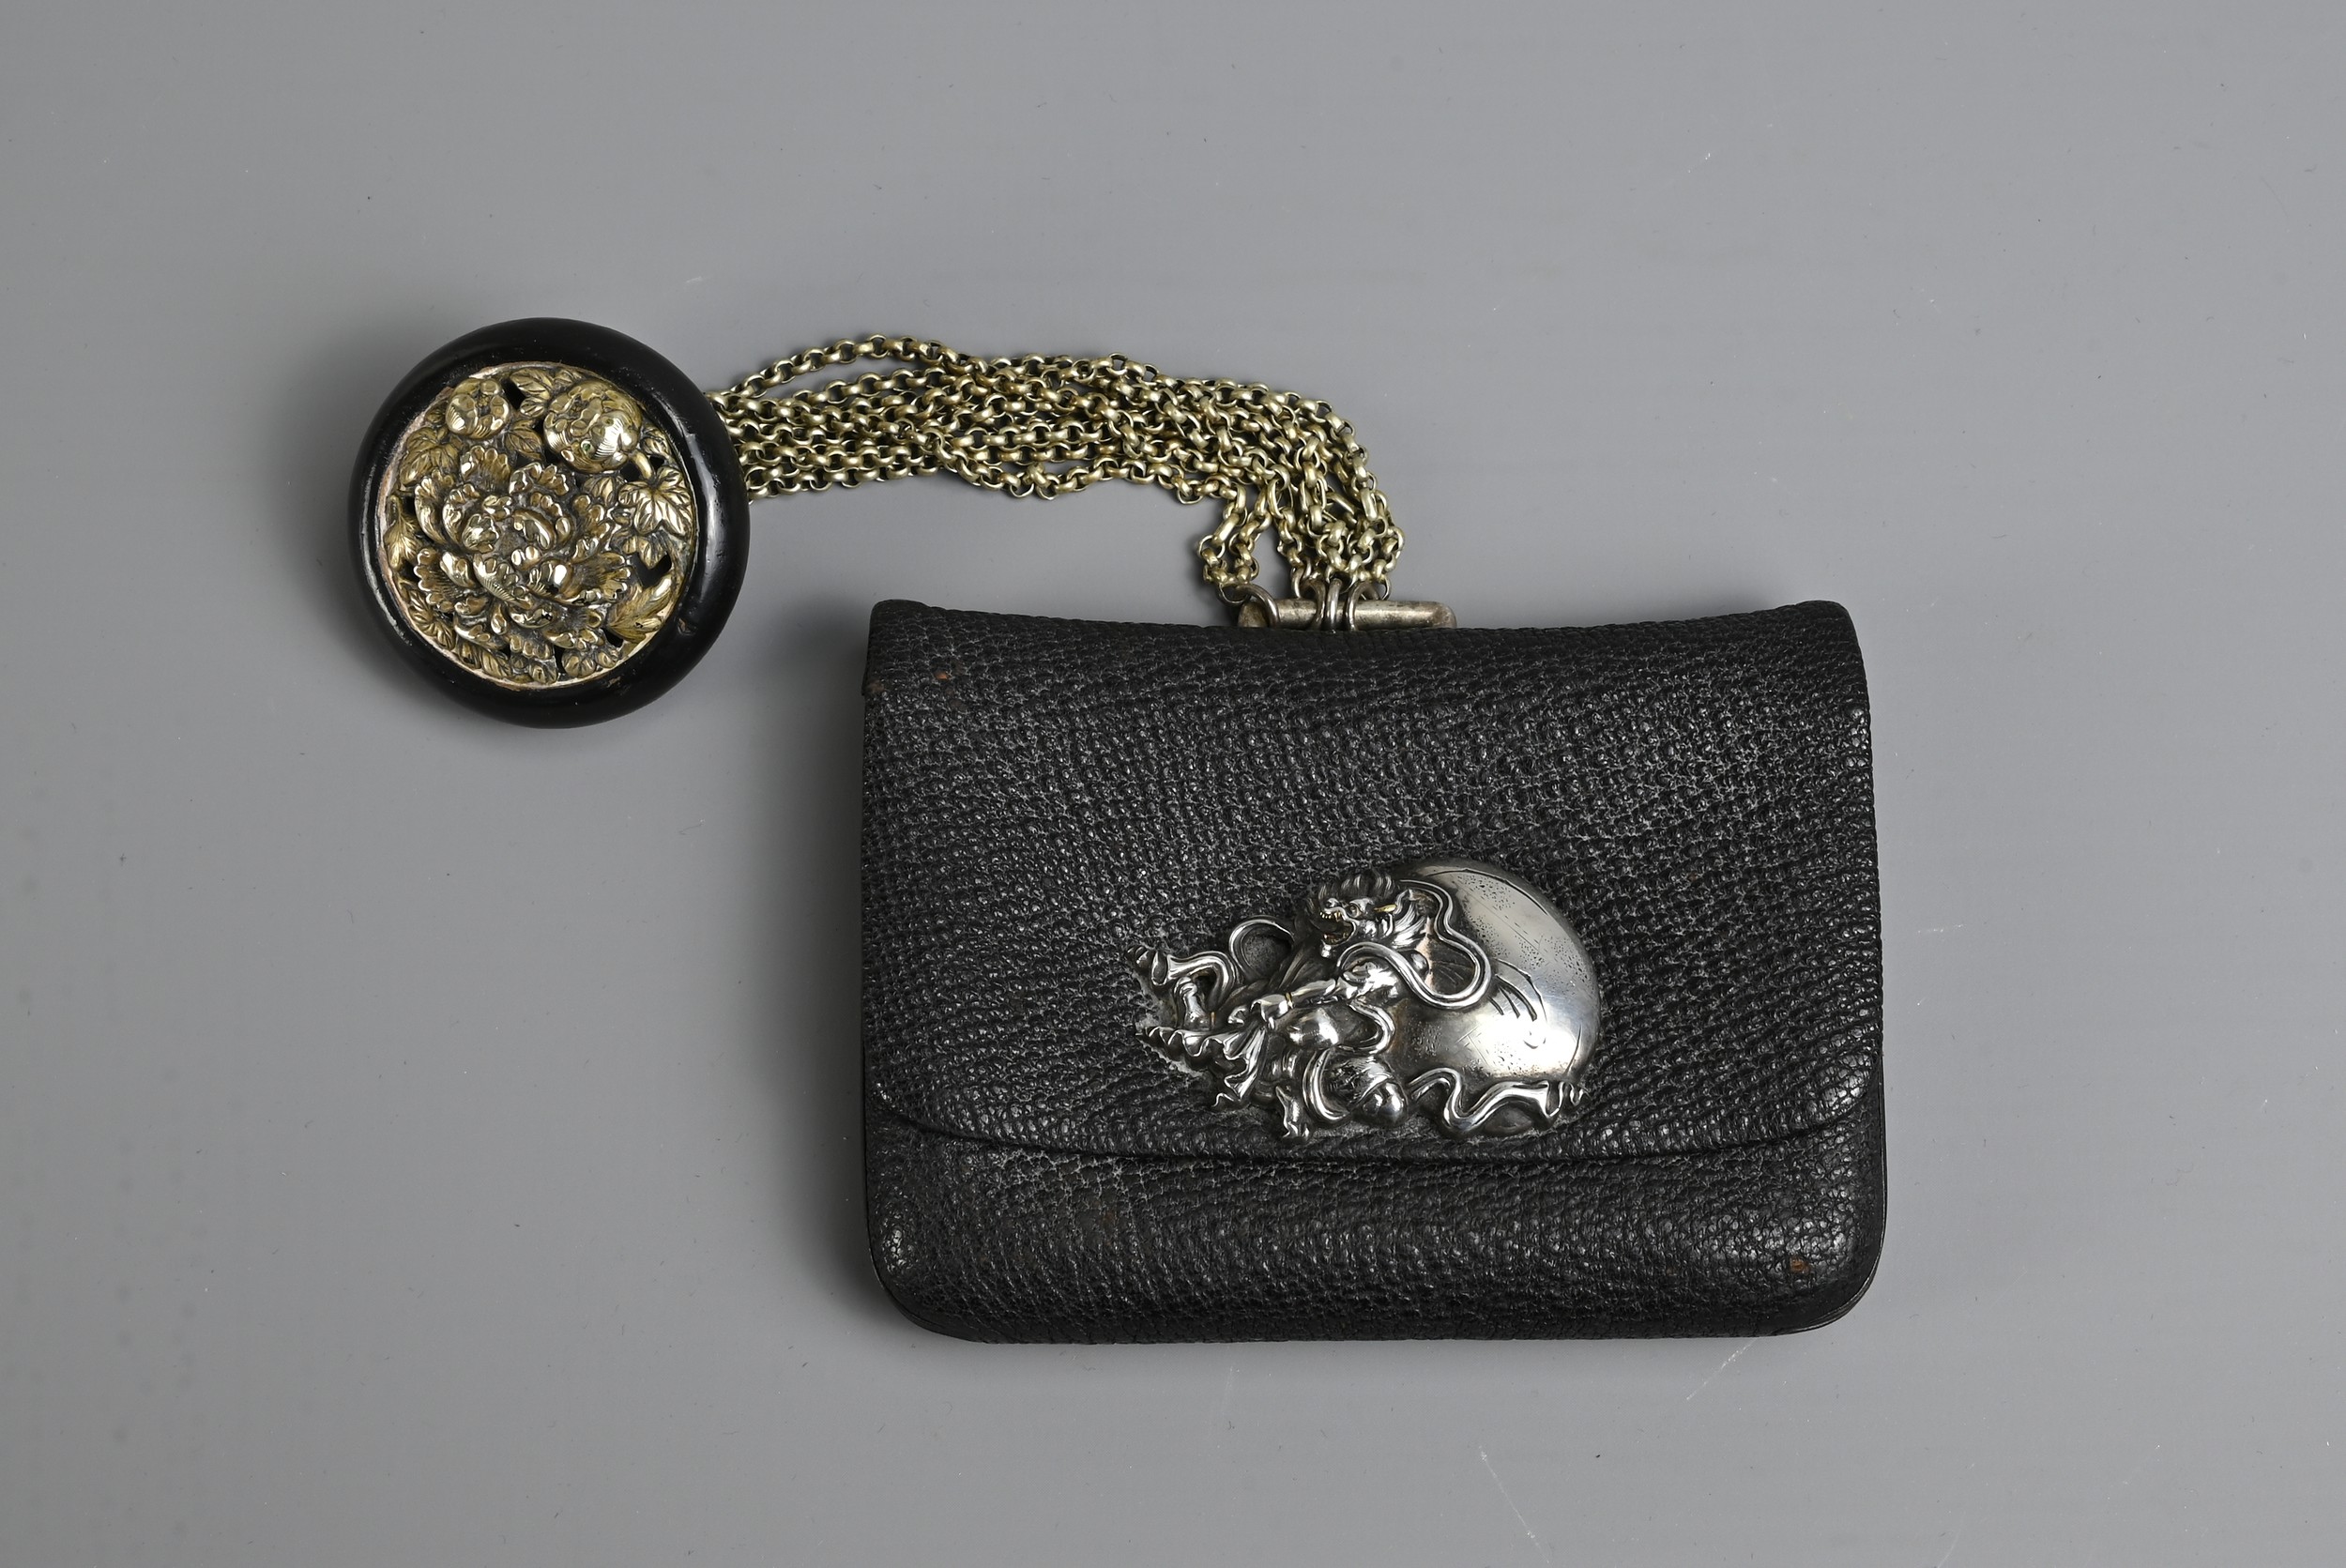 A JAPANESE MEIJI PERIOD (1868-1912) BLACK LEATHER COIN POUCH (FUKURO) WITH SILVER-COLOURED METAL - Image 3 of 6